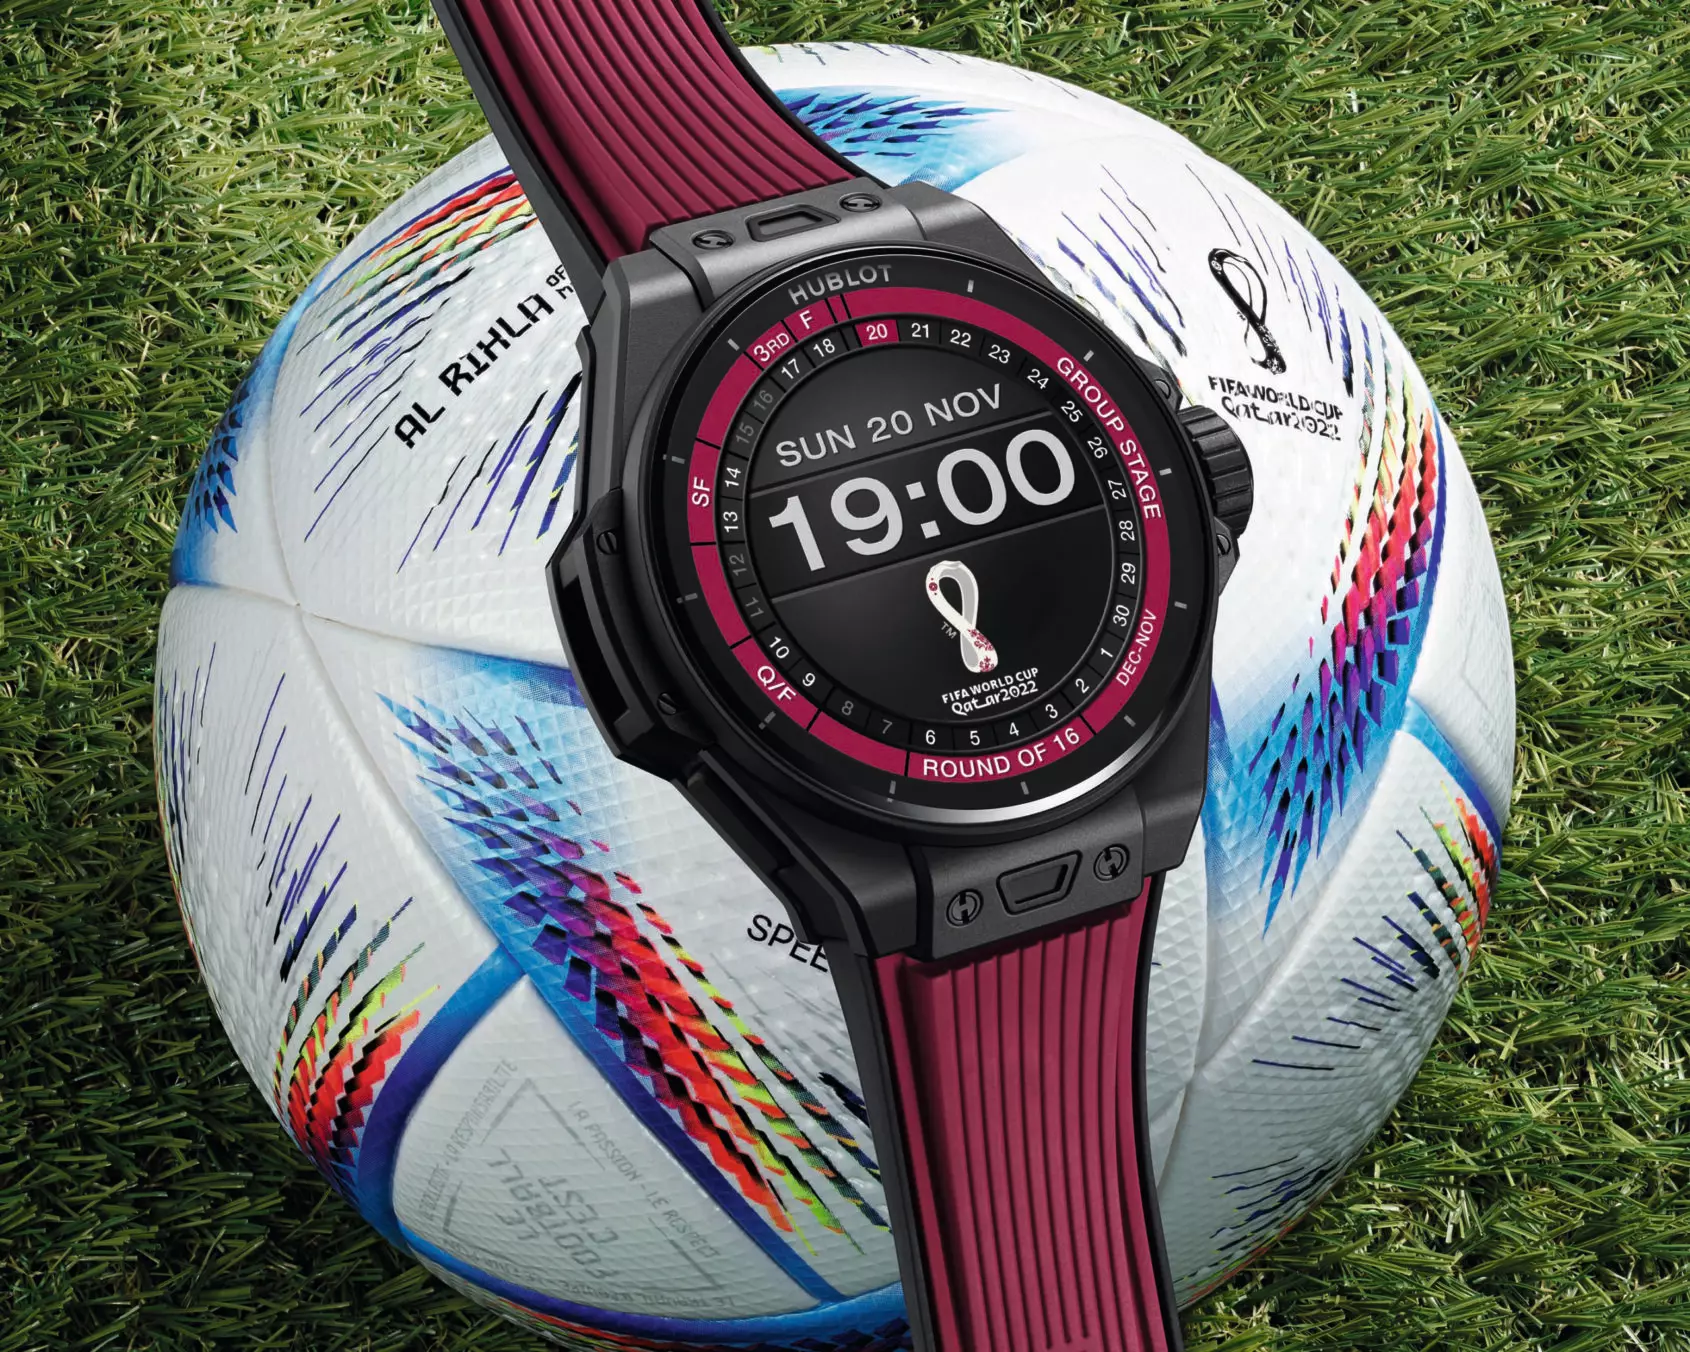 Hublot is Official Timekeeper of the FIFA Women's World Cup, France, 2019